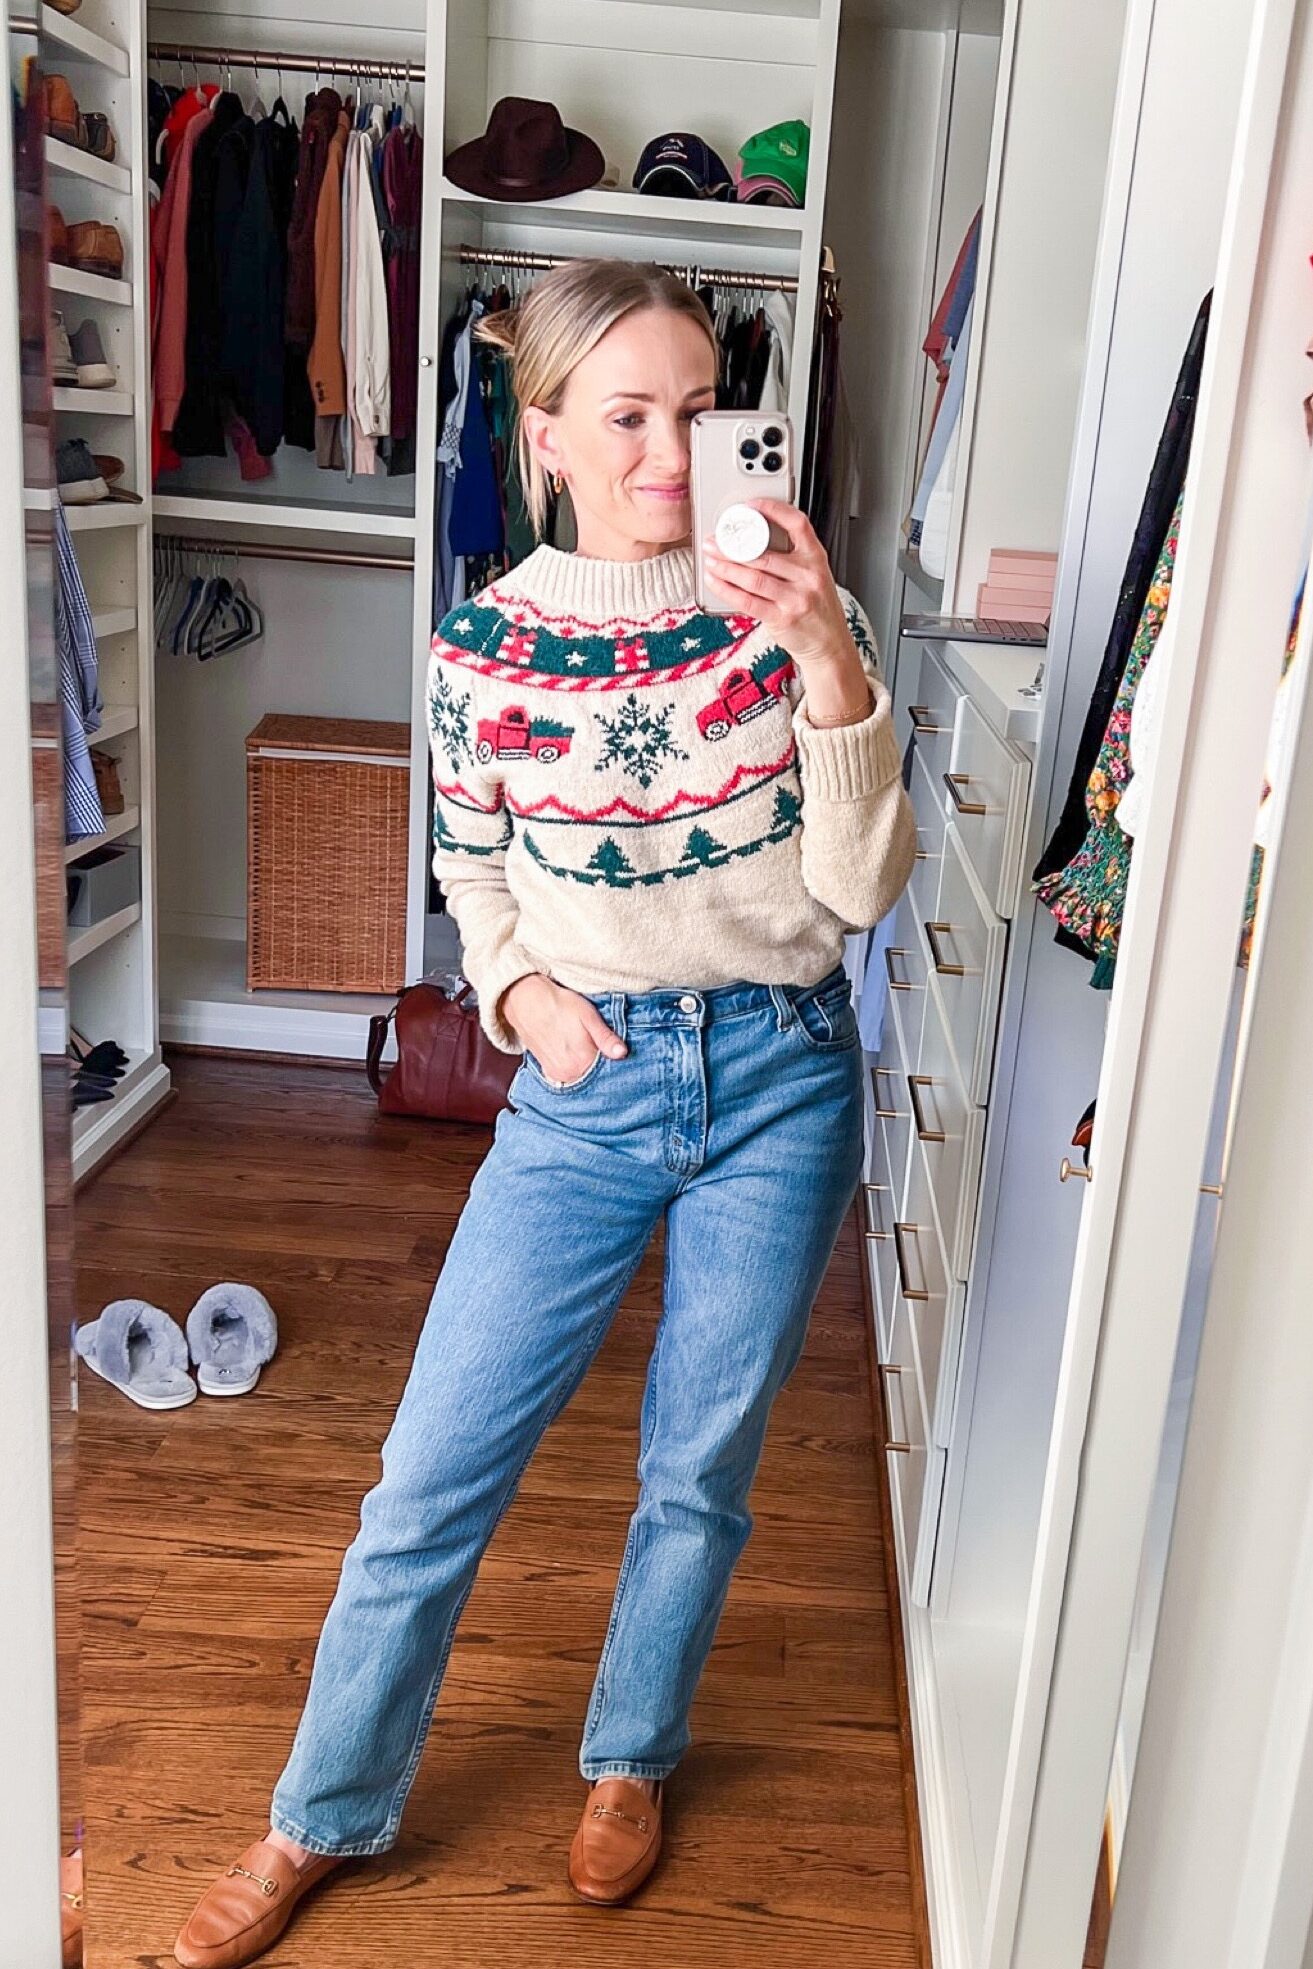 TeriLyn Adams wearing sweater and Sam Edelman Loraine Loafers from her Picks from the ShopBop Sale